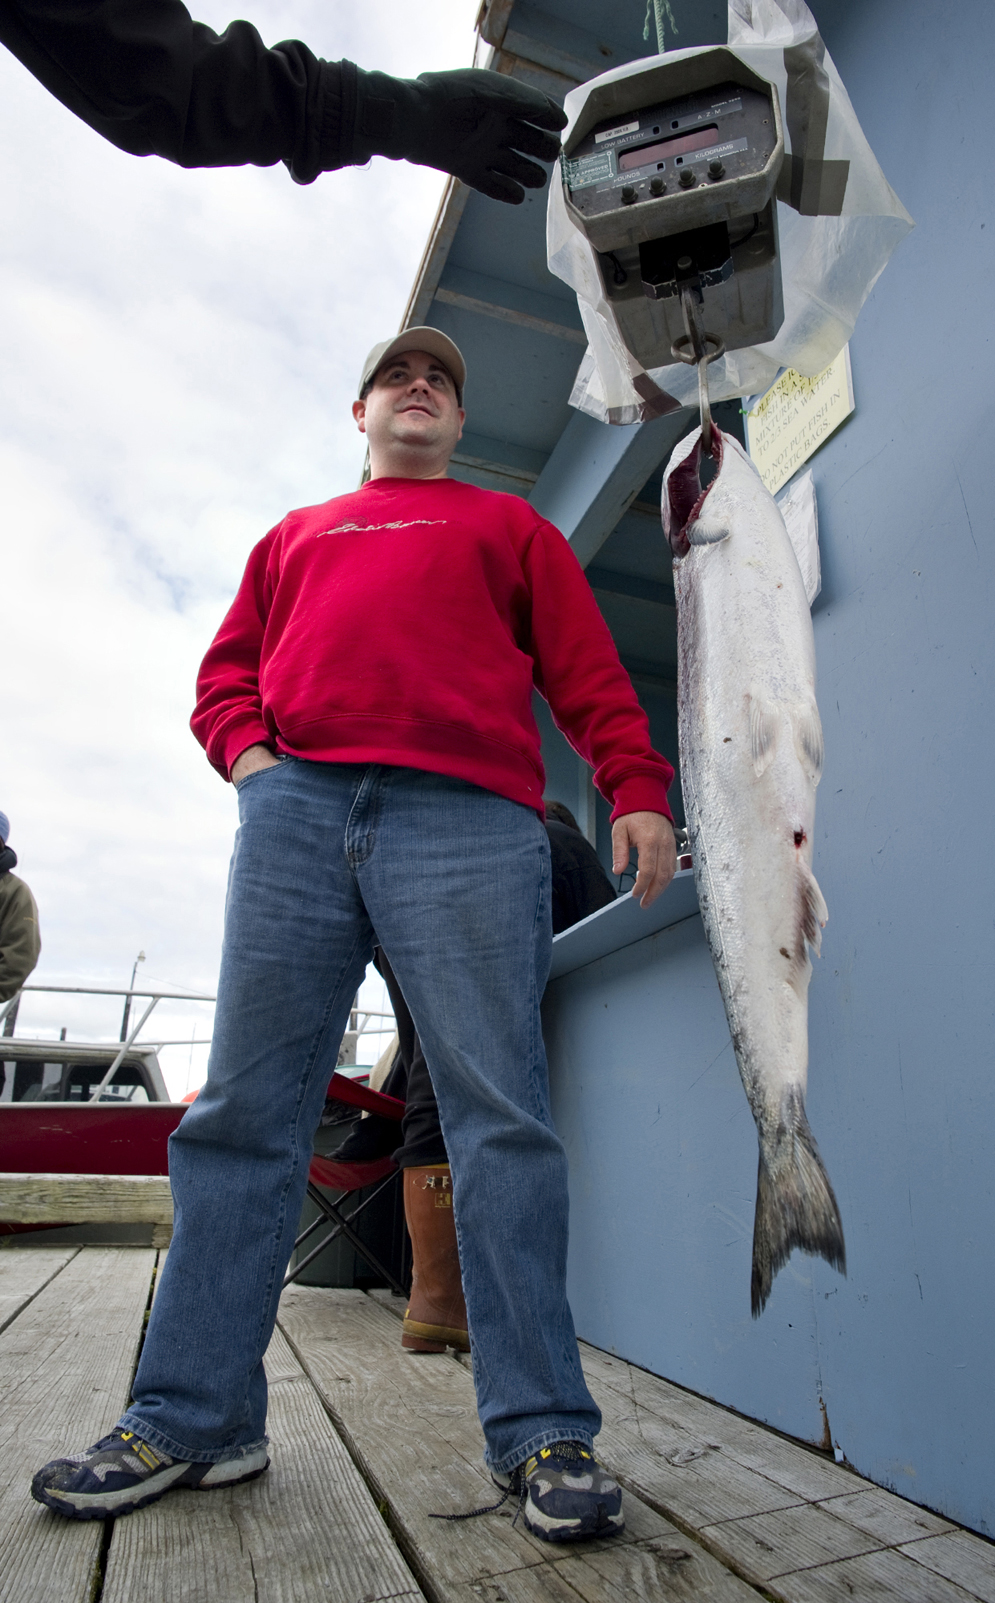 Joe Edwards of Houston, Texas, watches as his king salmon weights in at 16.2 pounds at the Douglas Harbor for the Golden North Salmon Derby in August of 2011. Scientists with the National Oceanic and Atmospheric Administration in Juneau said the 28-inch size limit for chinook salmon, while intended as a conservation measure, may be removing fast-growing fish from the population over time.